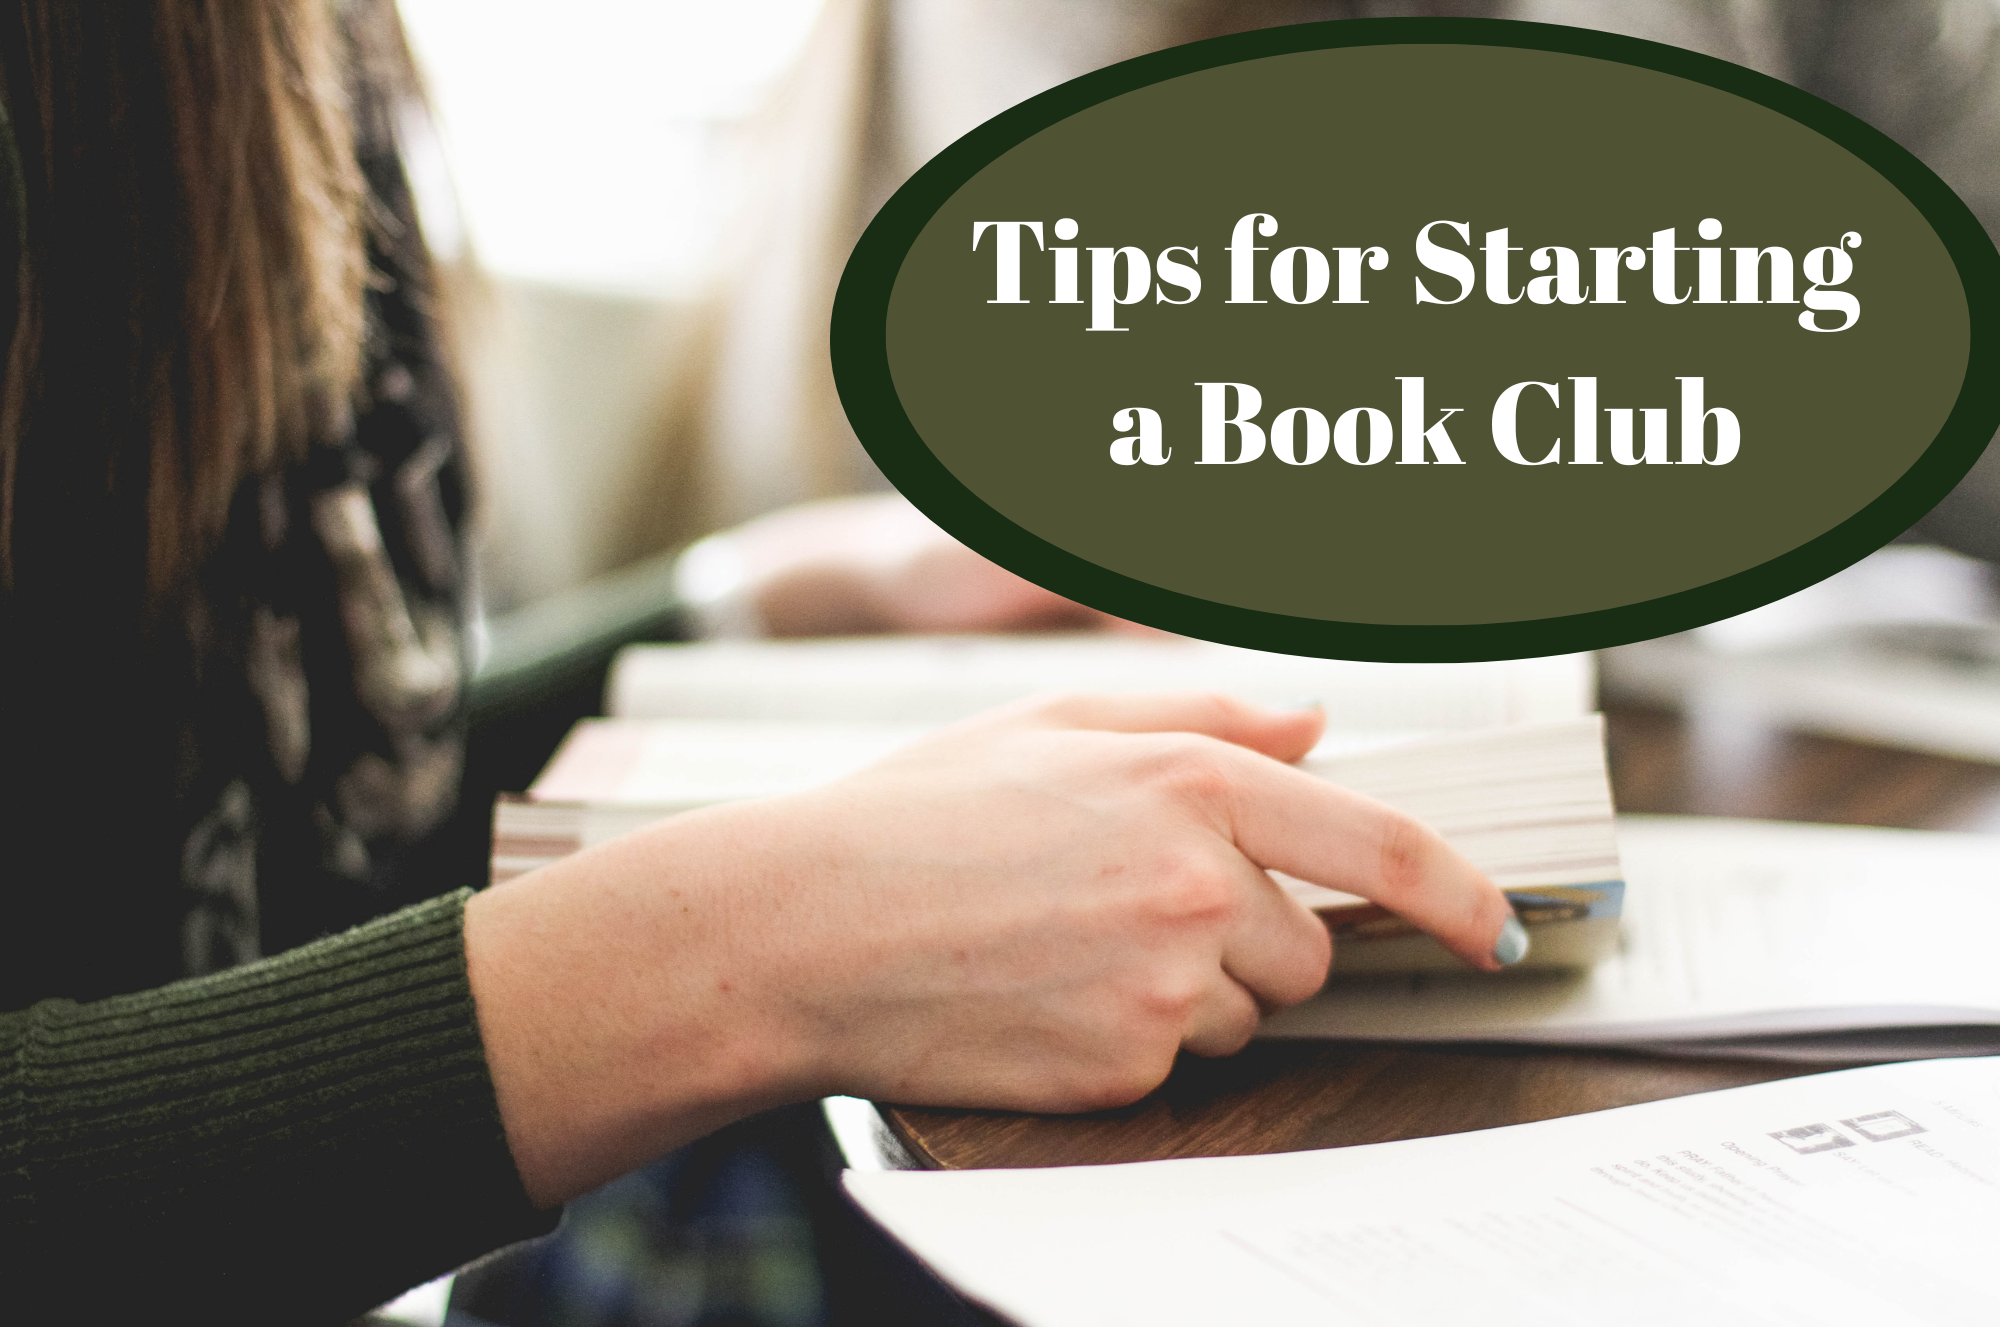 So, You Want to Start a Book Club?